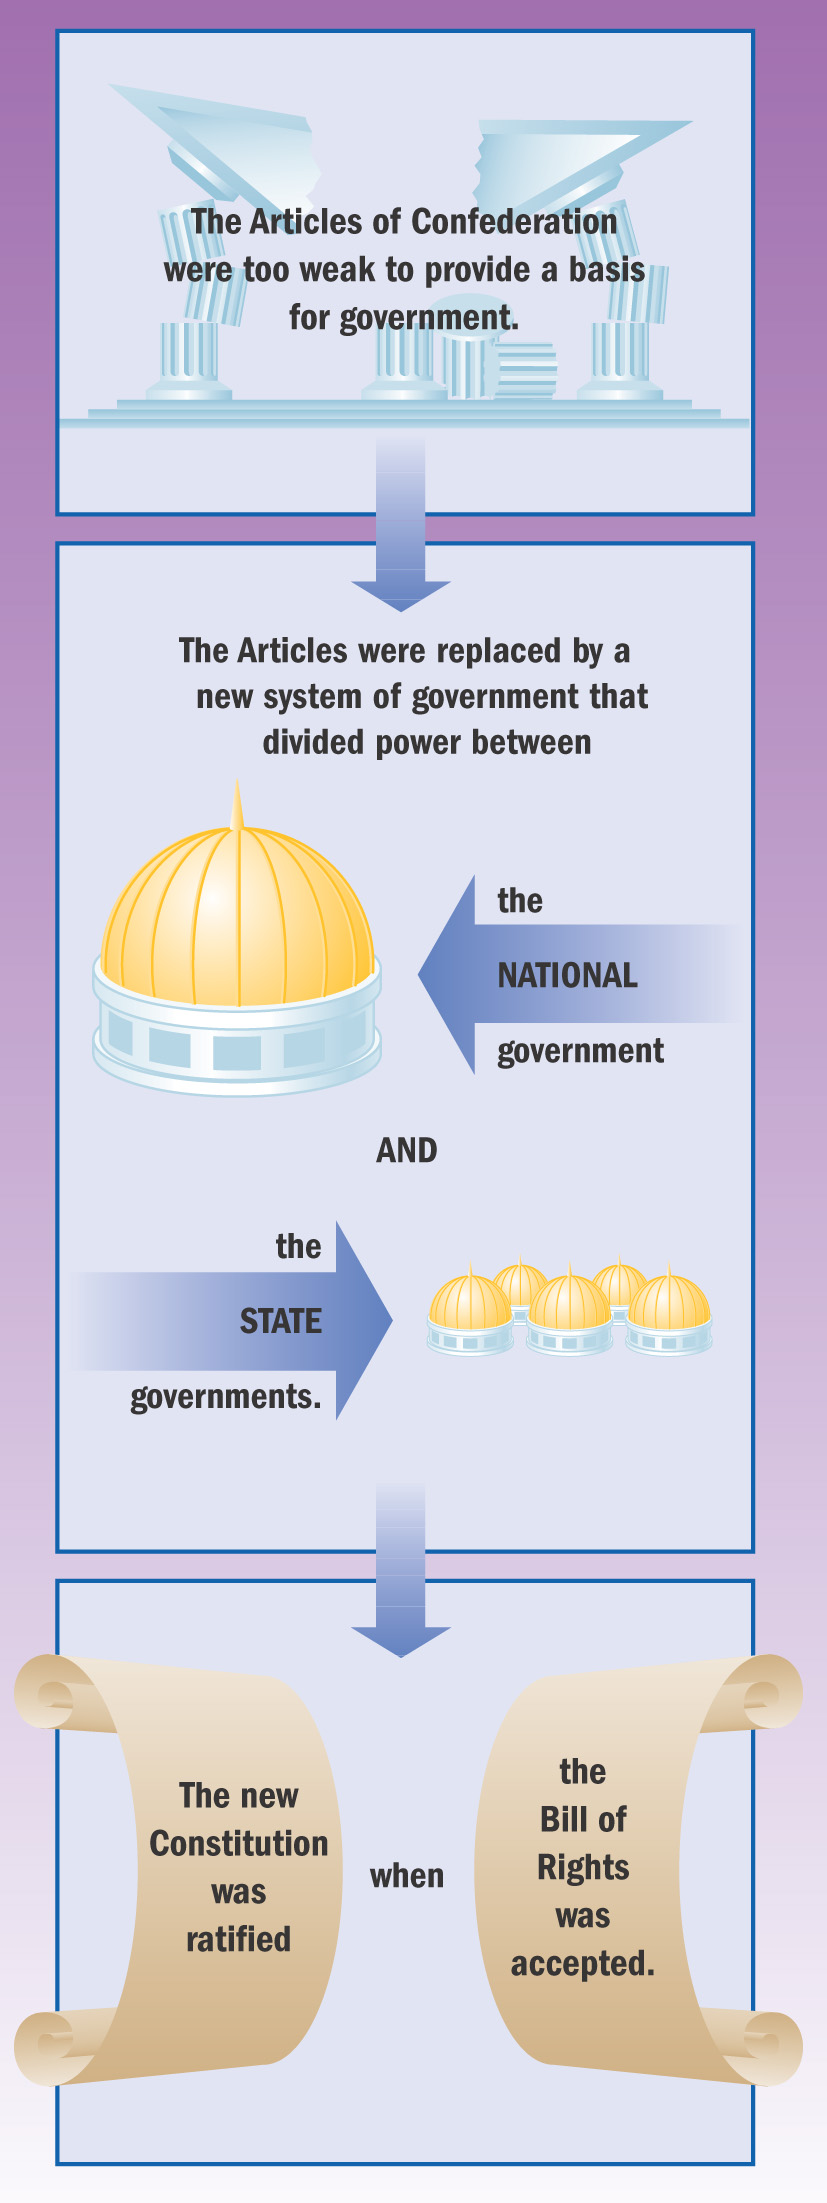 A
chart shows the Articles of Confederation, leading to a new system of government that divided power
between the national government and the state government. The new constitution was ratified when the
Bill of Rights was accepted.